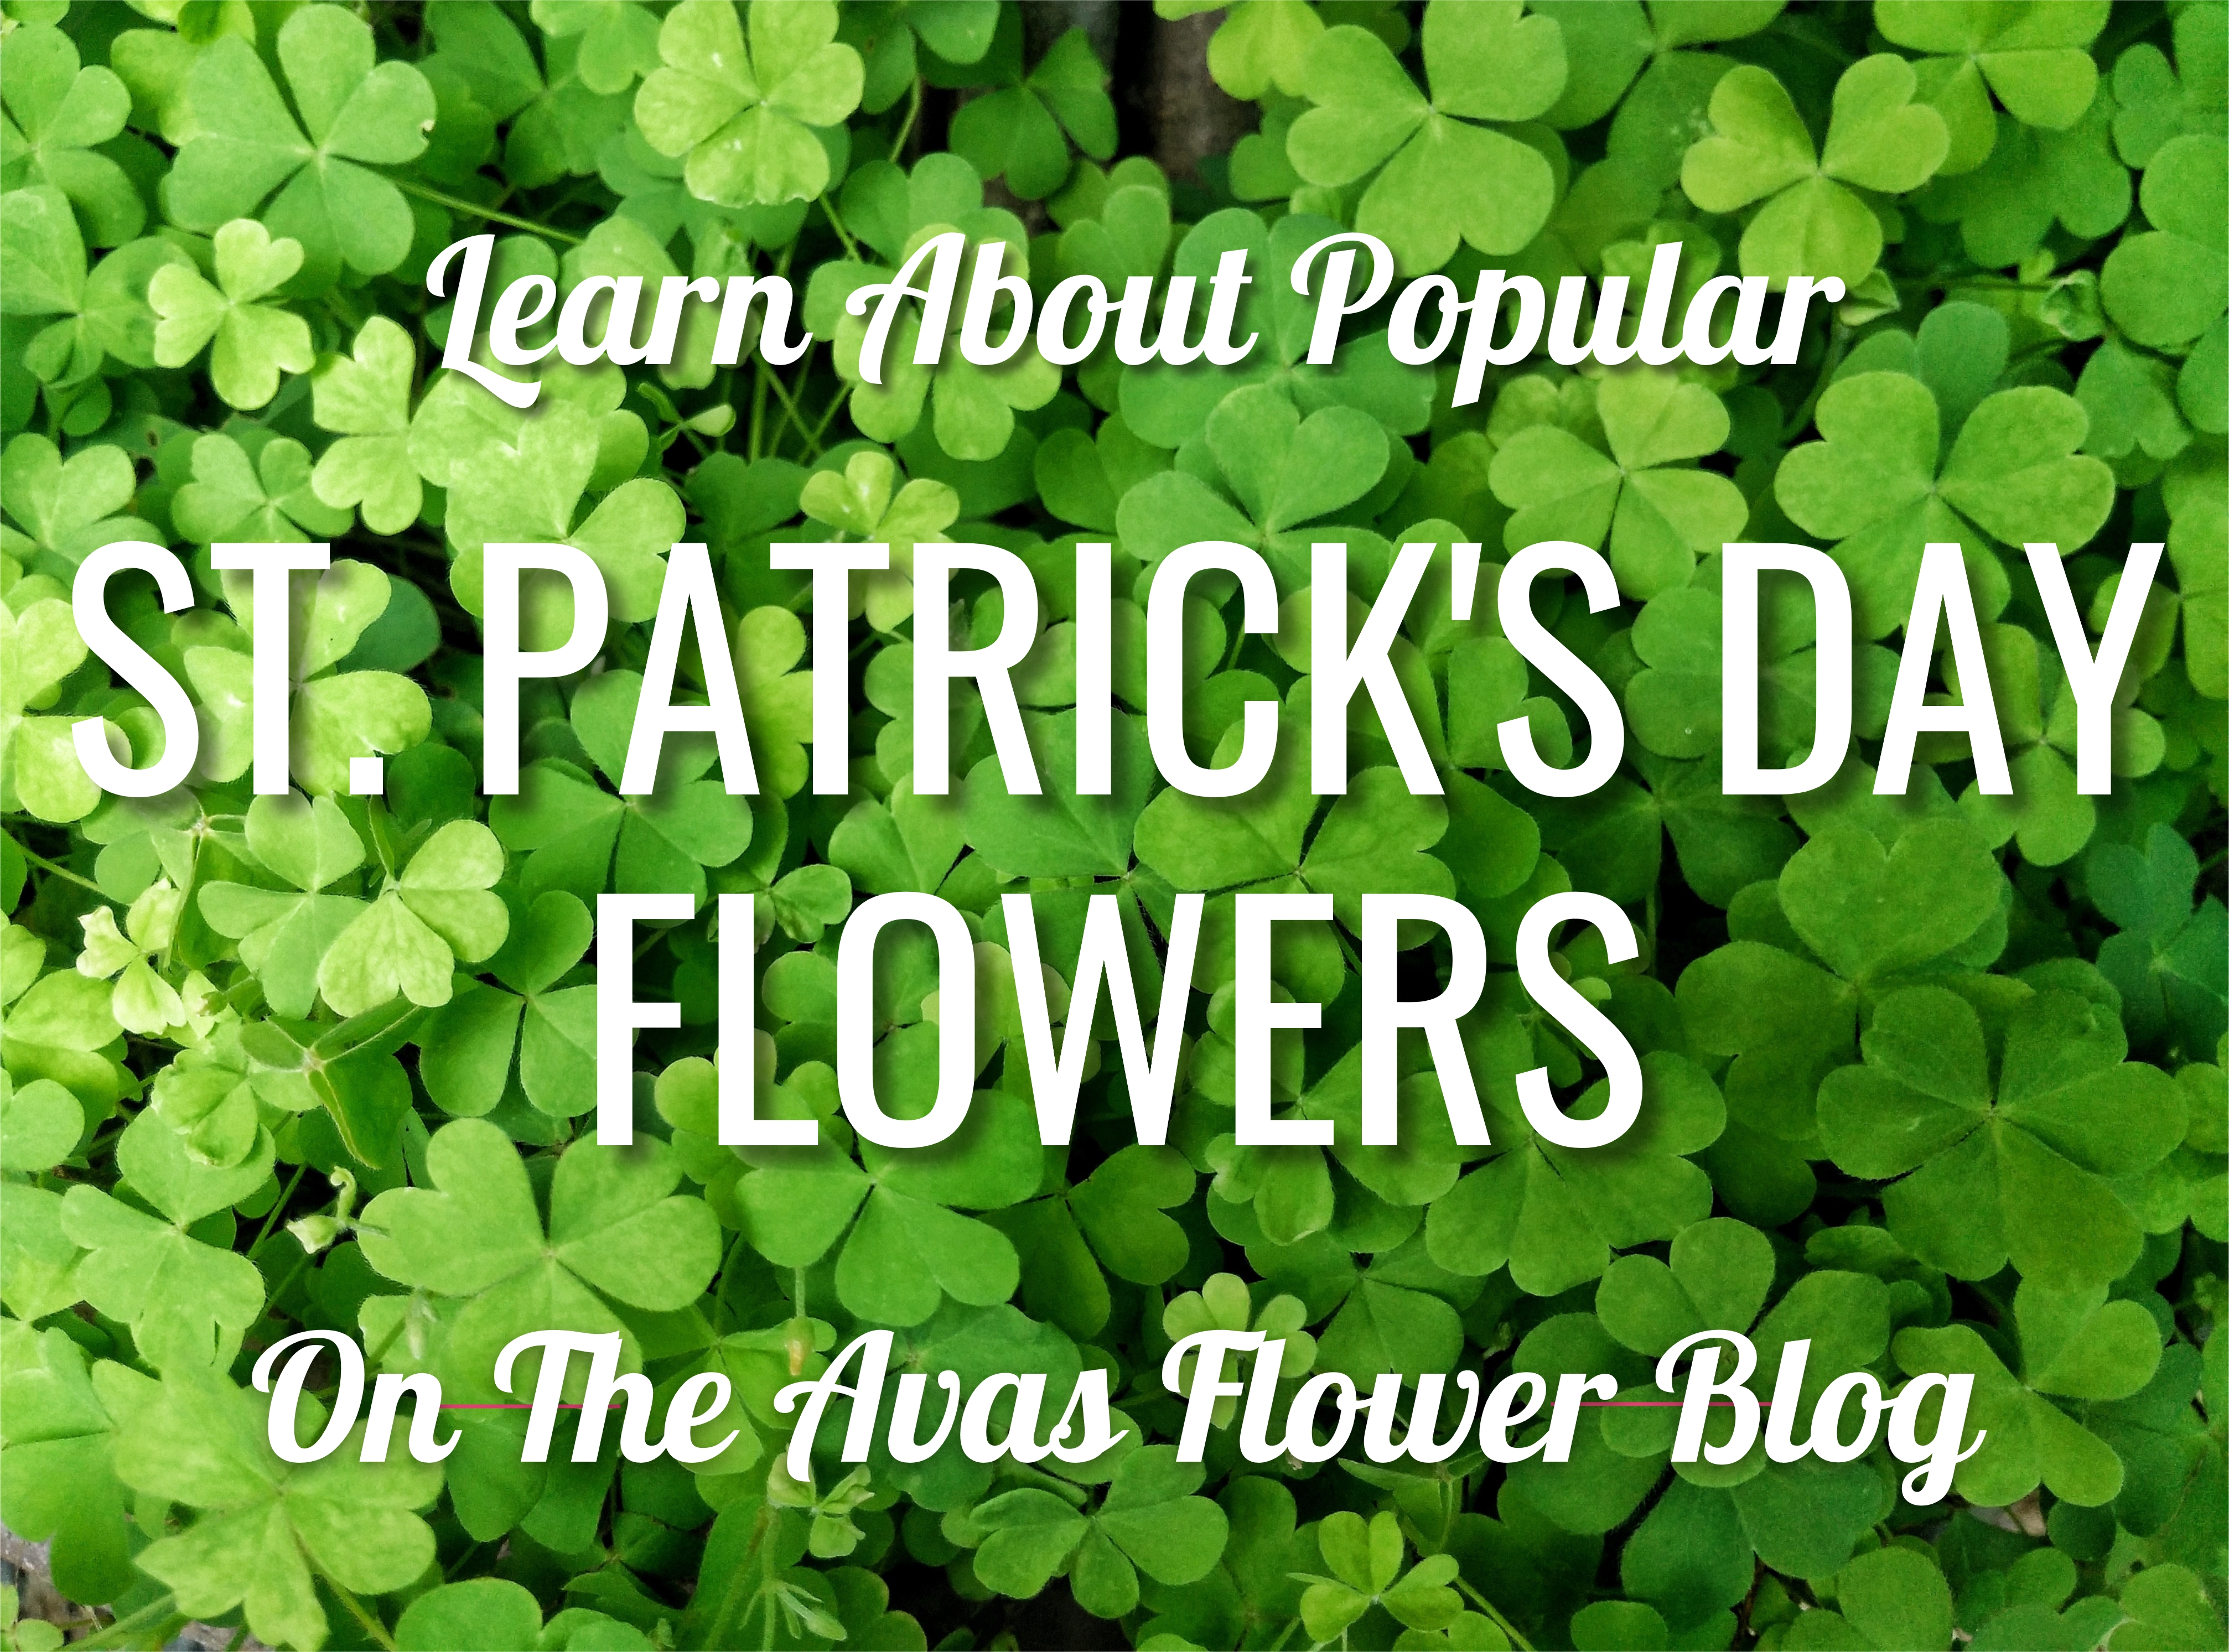 The Best Flowers For St. Patrick’s Day Celebrations